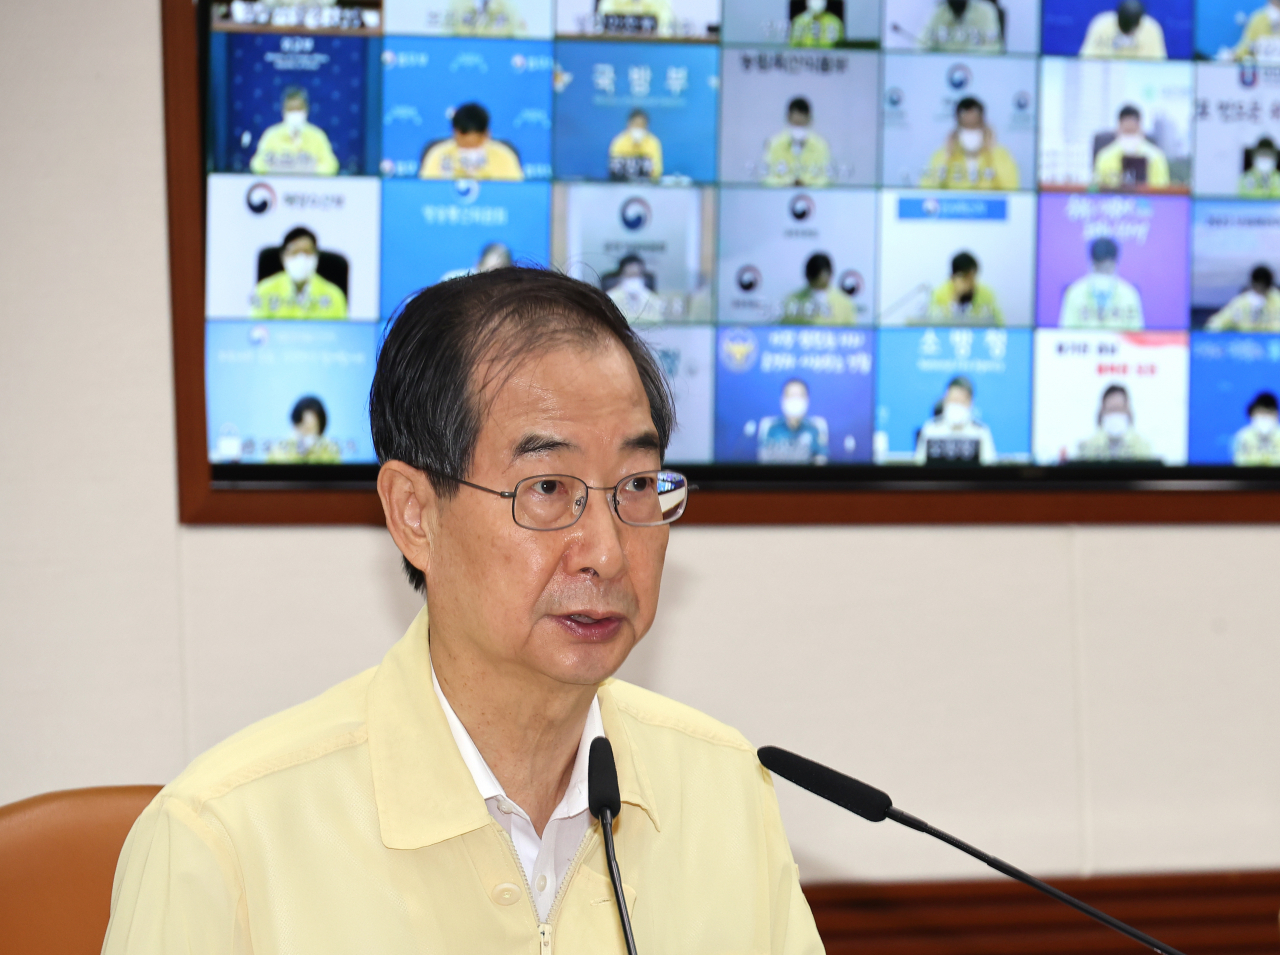 Prime Minister Han Duck-soo speaks during a meeting of the Central Disaster and Safety Countermeasures Headquarters about measures to deal with the coronavirus pandemic at the government complex in Seoul on Wednesday. (Yonhap)